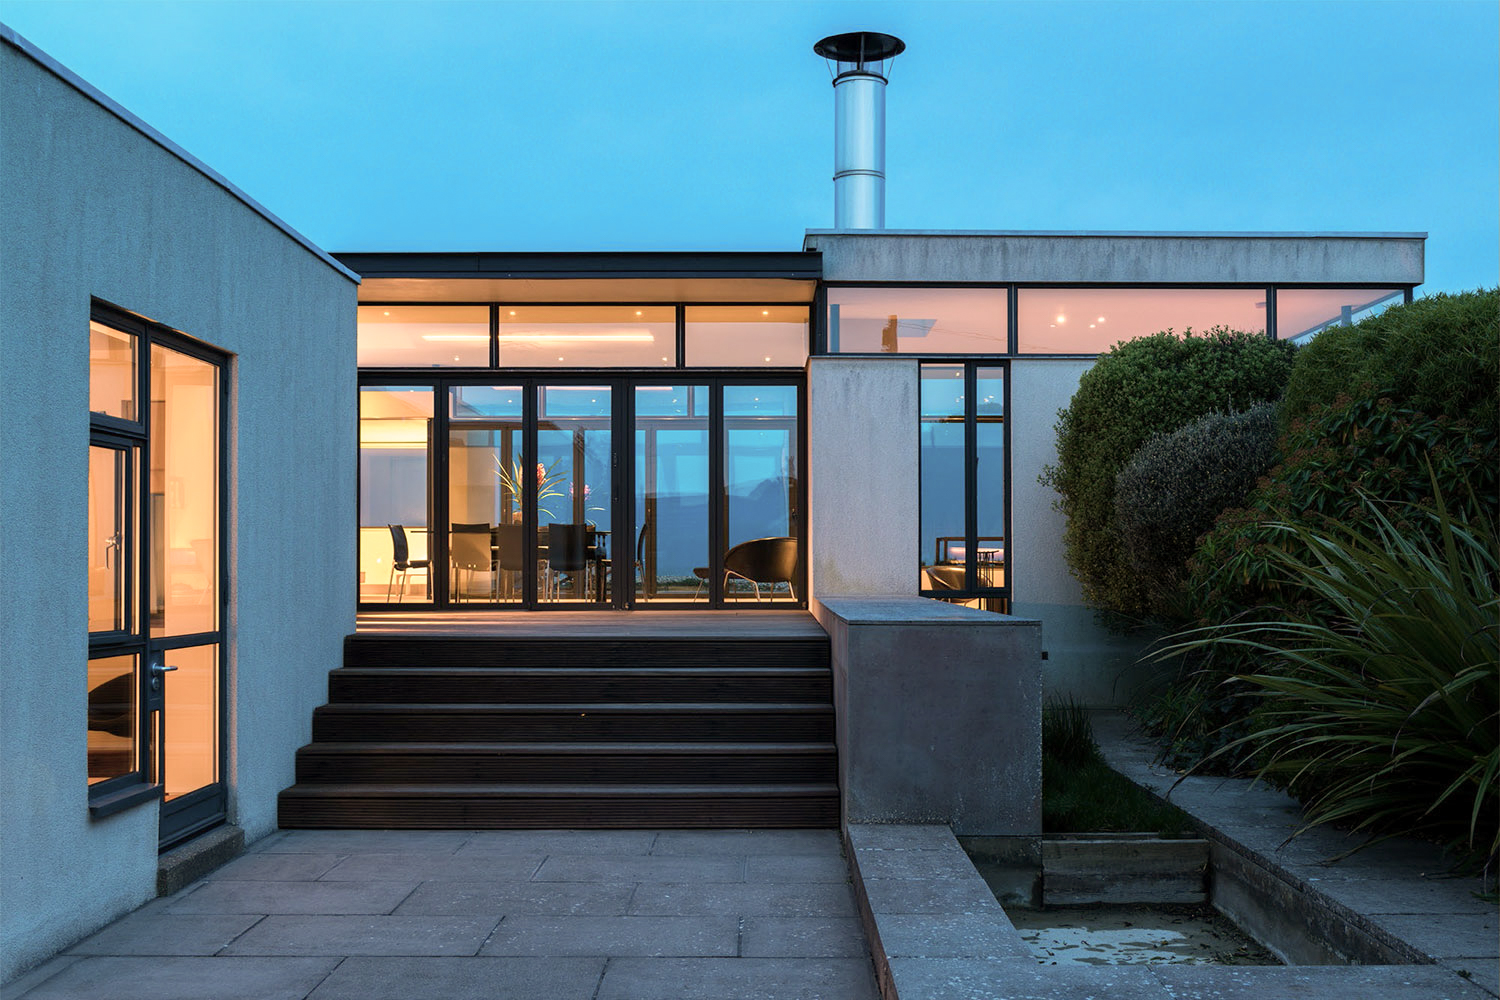 PAGHAM BEACH HOUSE - West Sussex, Great Britain, UK